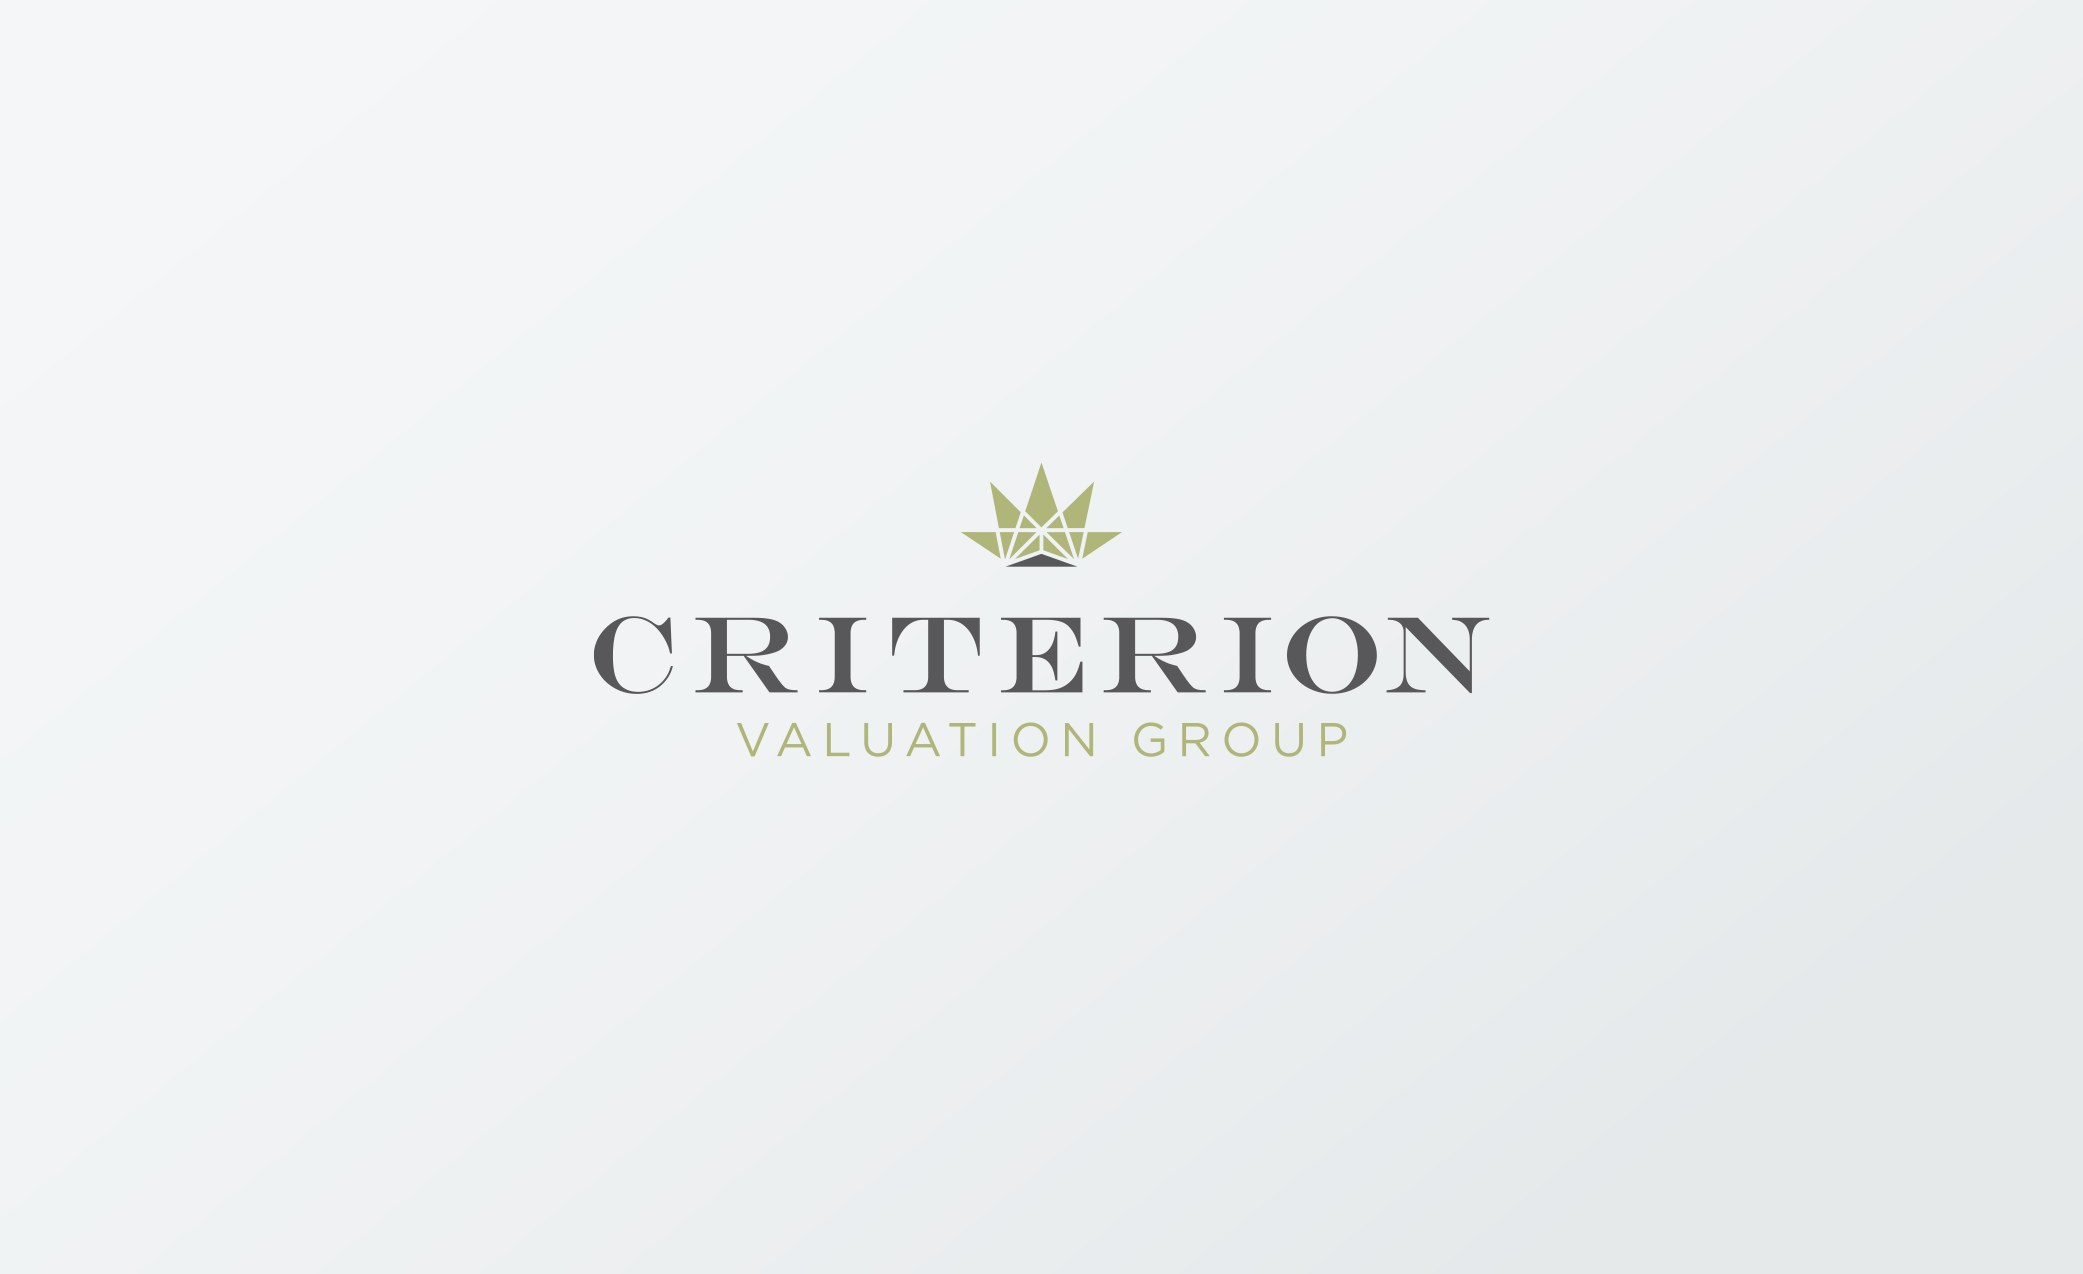 Criterion Valuation Group Logo